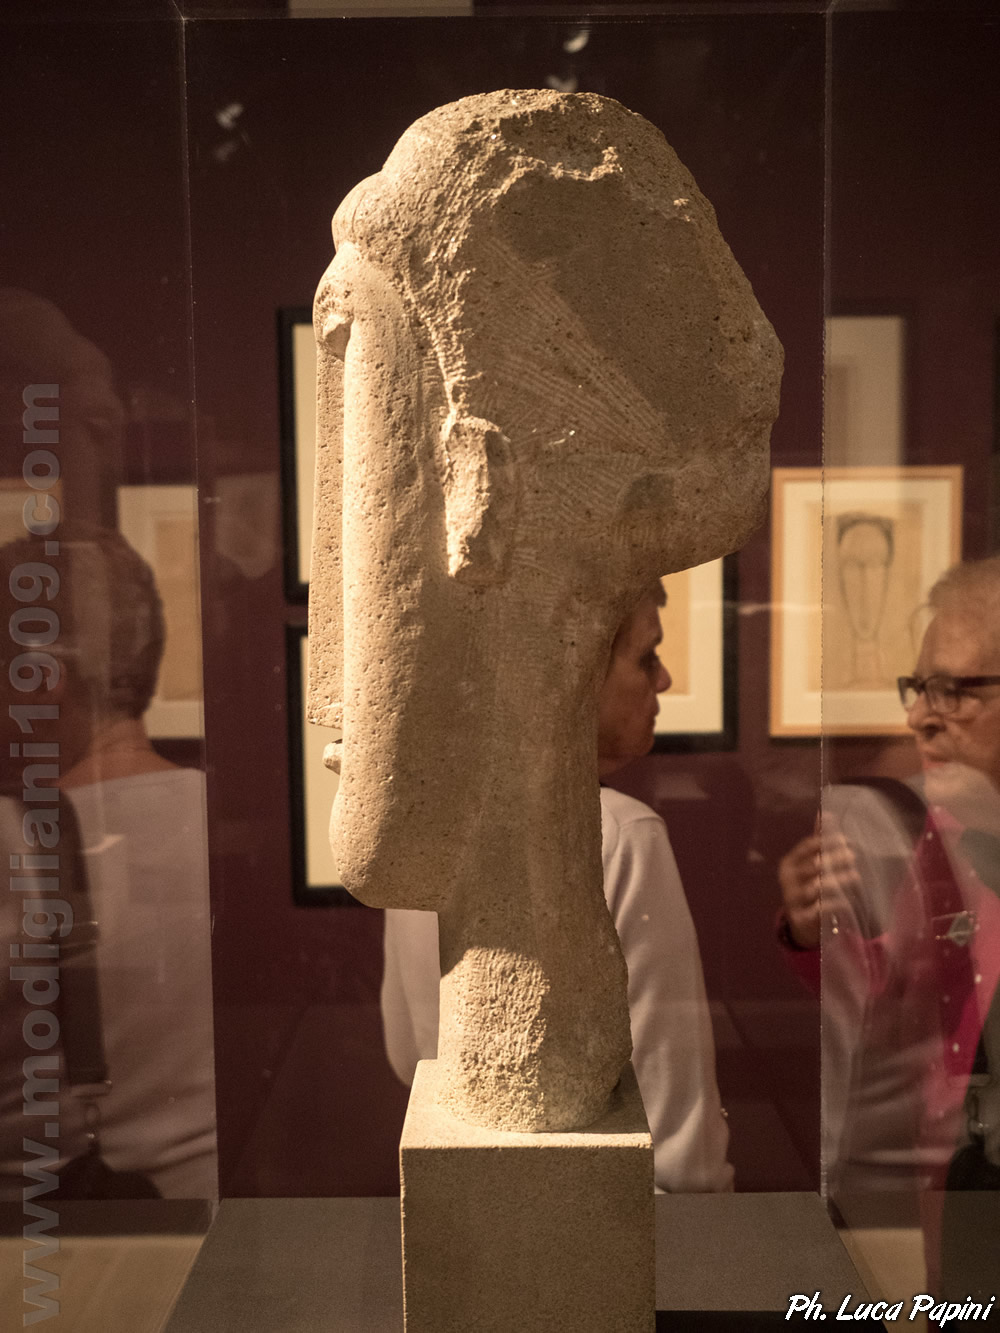 Woman's head (left side), Amedeo Modigliani, 1911 - 1912, Limestone, National Gallery of Art, Washington, D.C. (Chester Dale Collection)